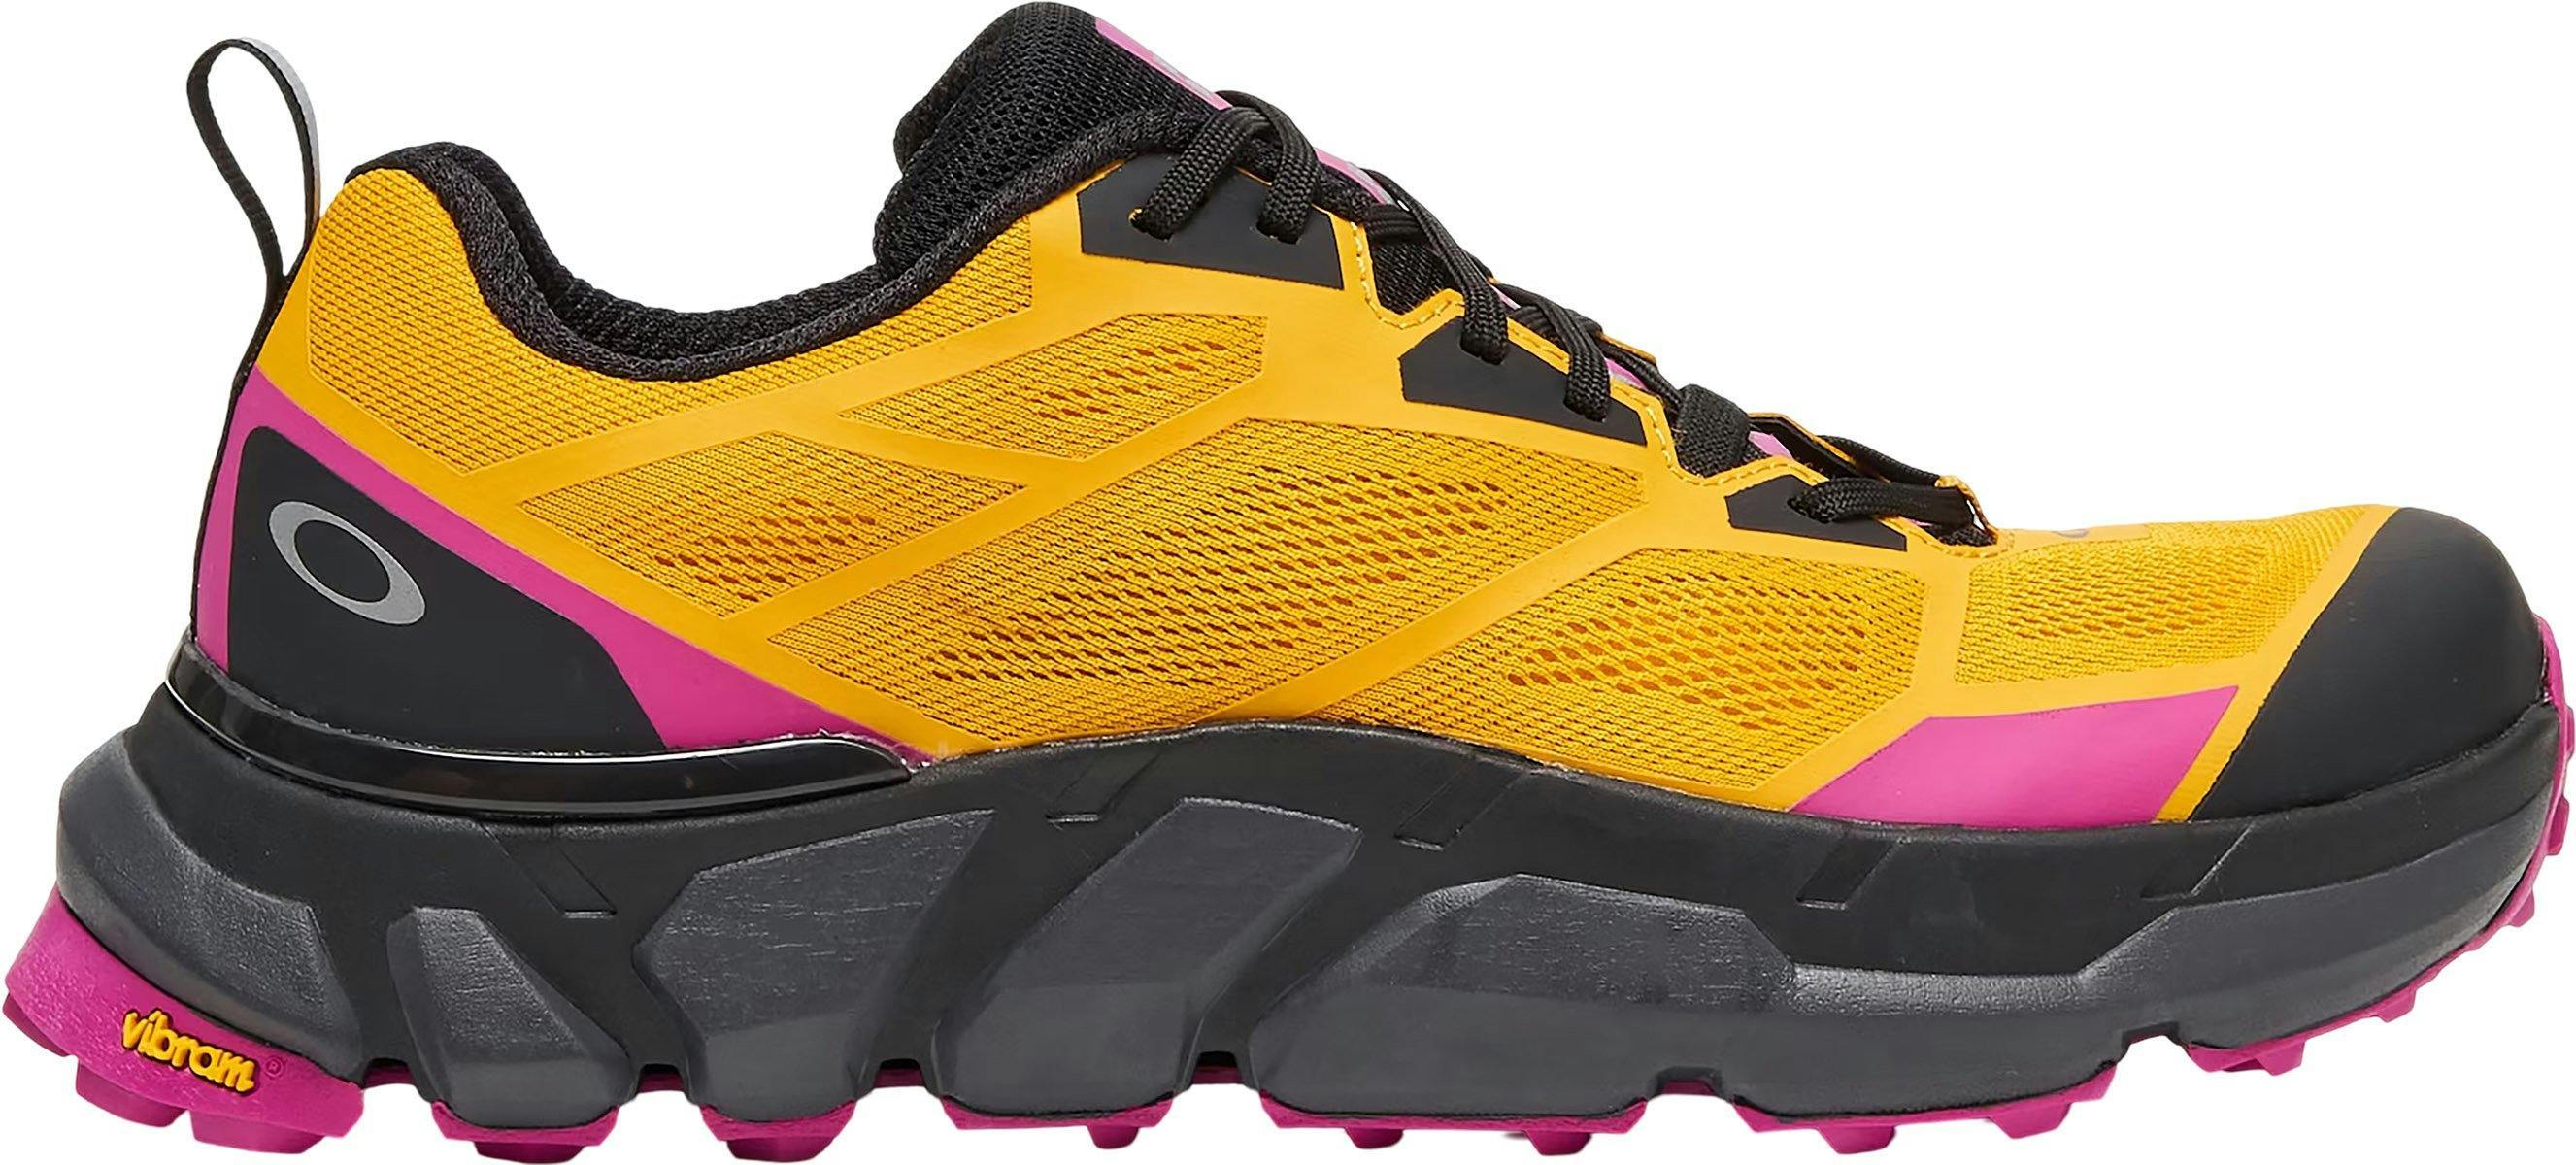 Product image for Light Breathe Trail Shoes - Men's